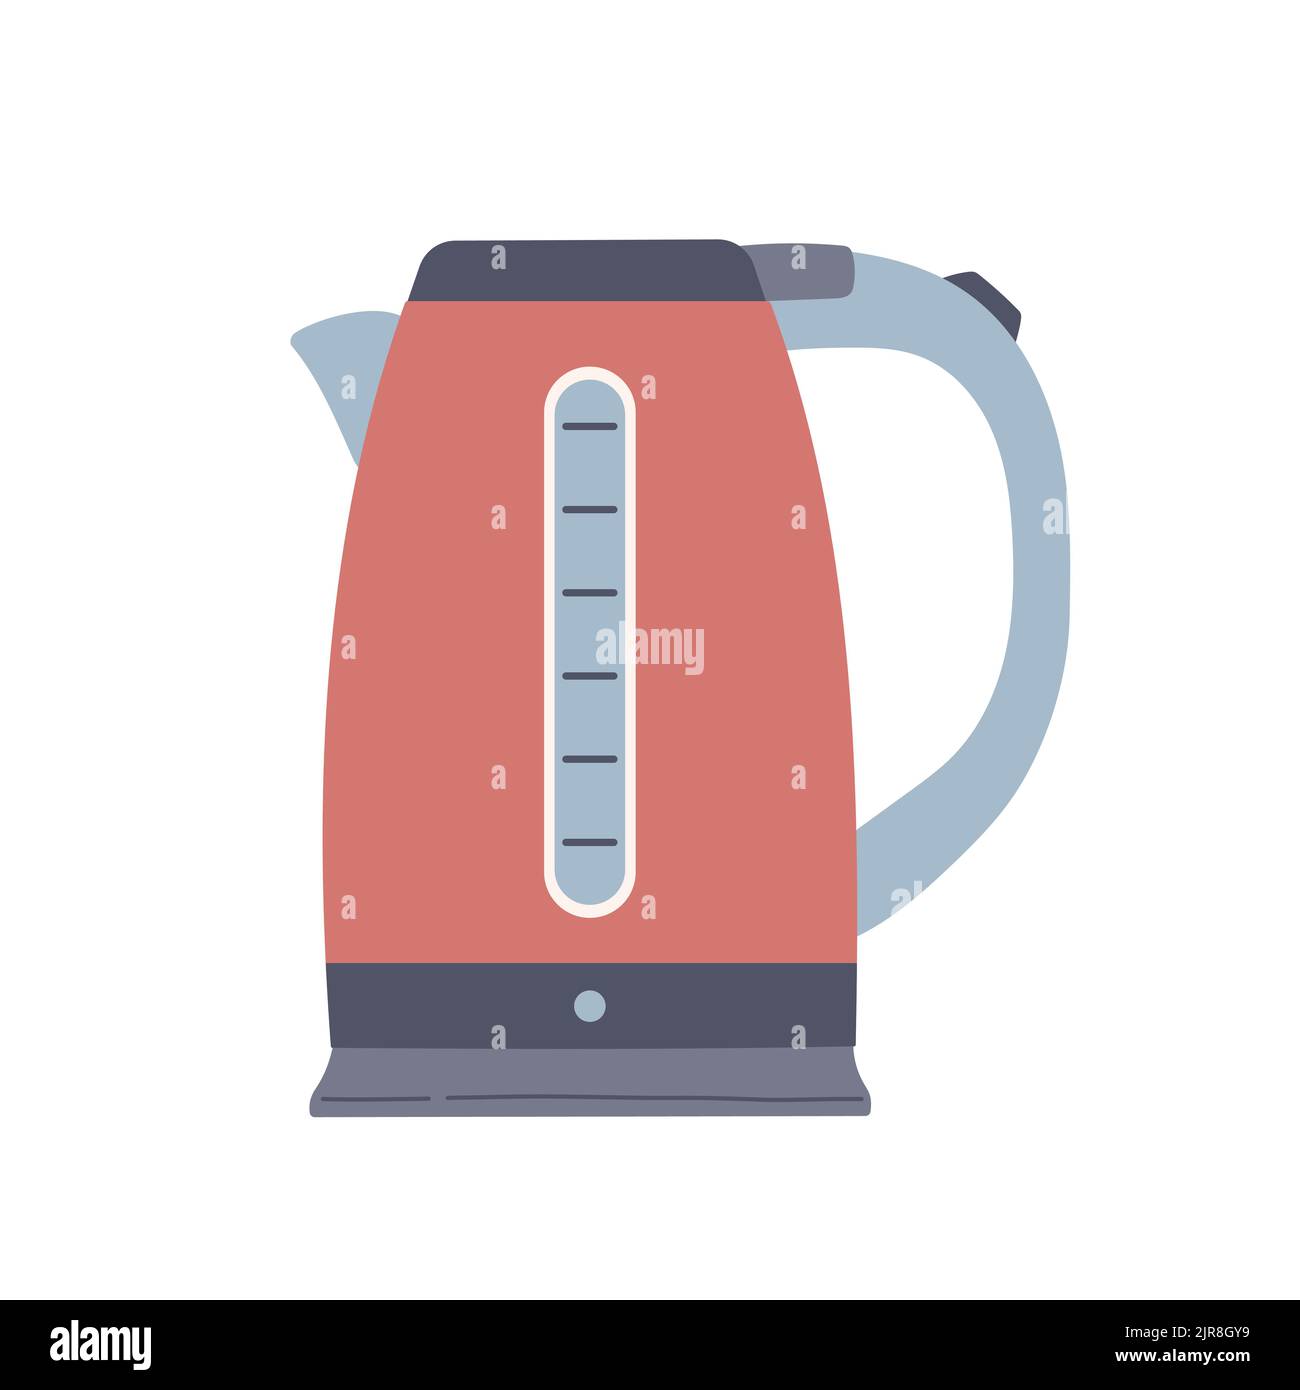 https://c8.alamy.com/comp/2JR8GY9/electric-kettle-in-flat-design-style-vector-2JR8GY9.jpg